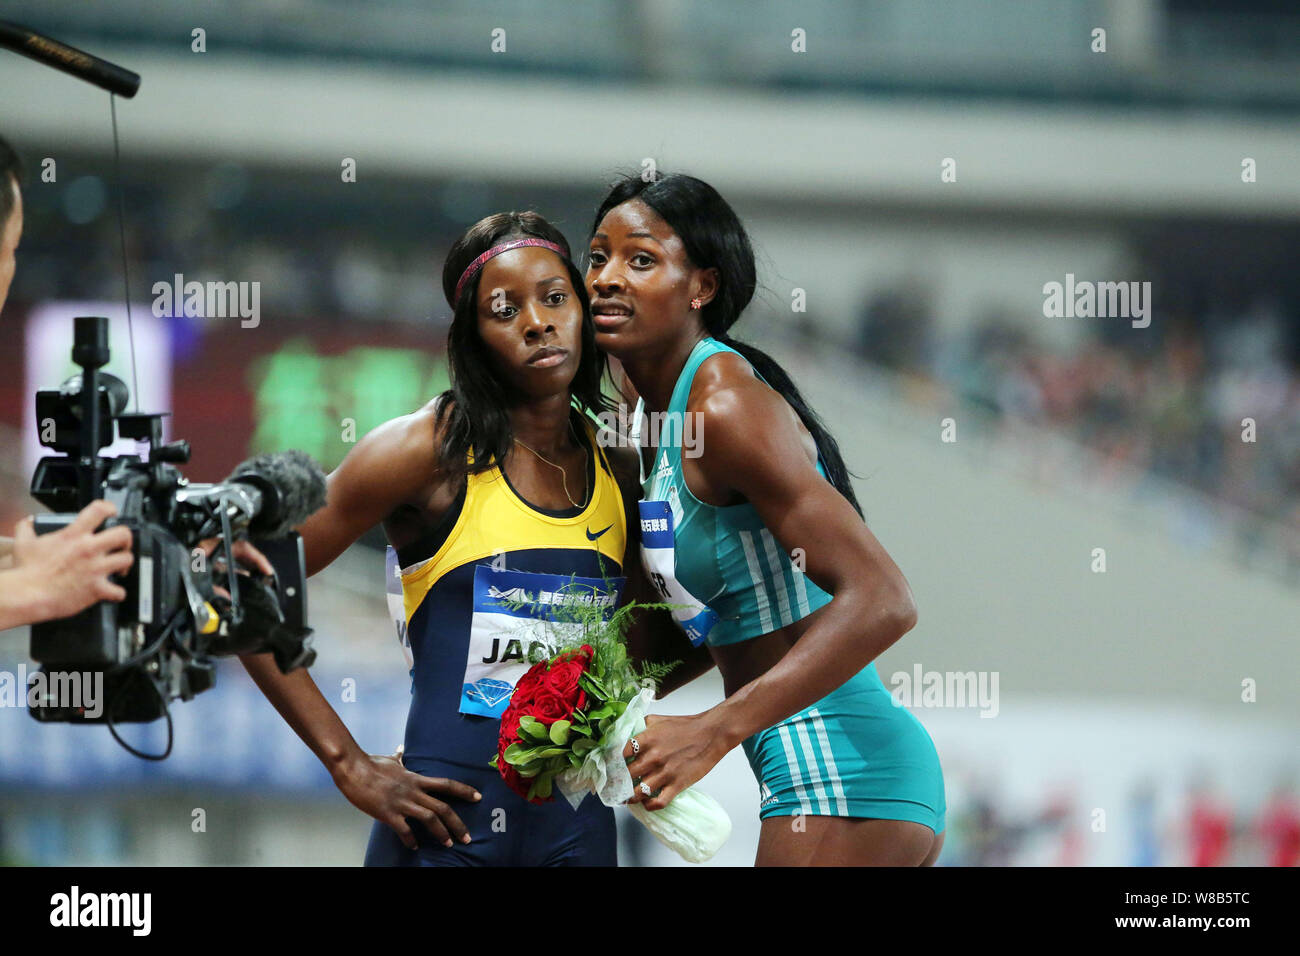 Shaunae Miller of Bahamas, right, poses with Shericka Jackson of Jamaica after winning the women's 400m during the IAAF Diamond League Shanghai 2016 i Stock Photo